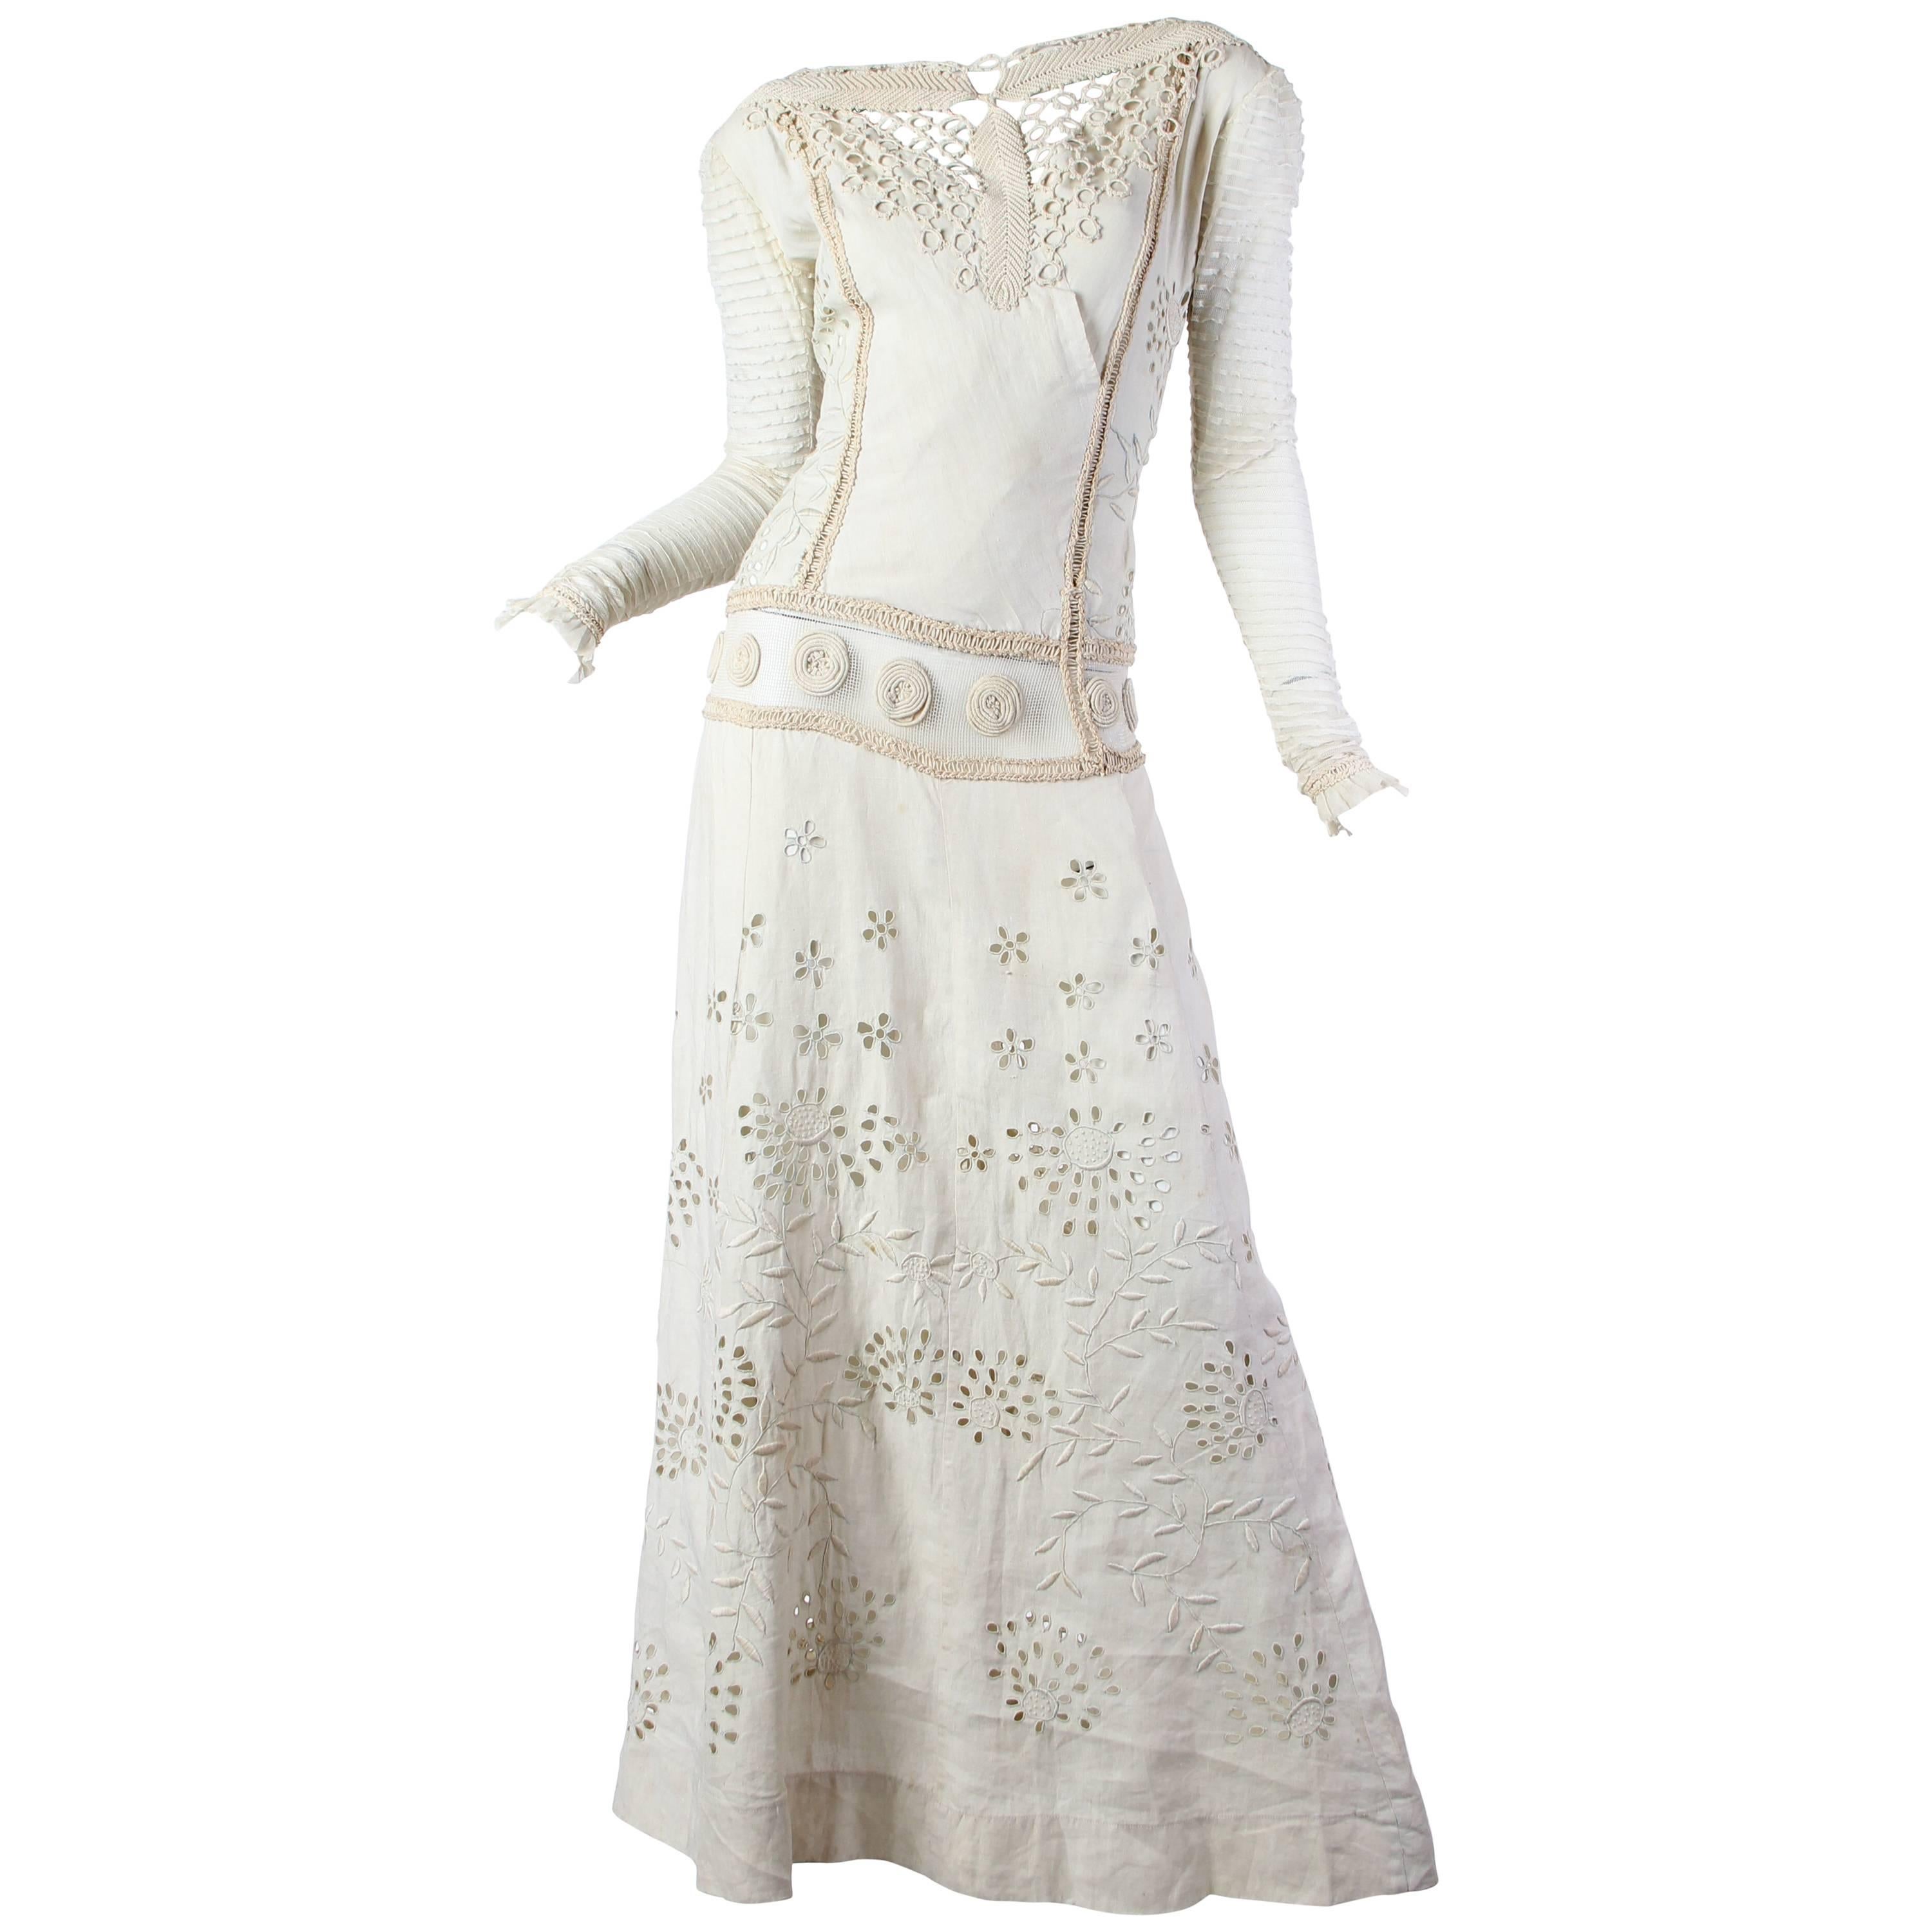 Beautifully Rebuilt Edwardian Hand Embroidered Lace Dress